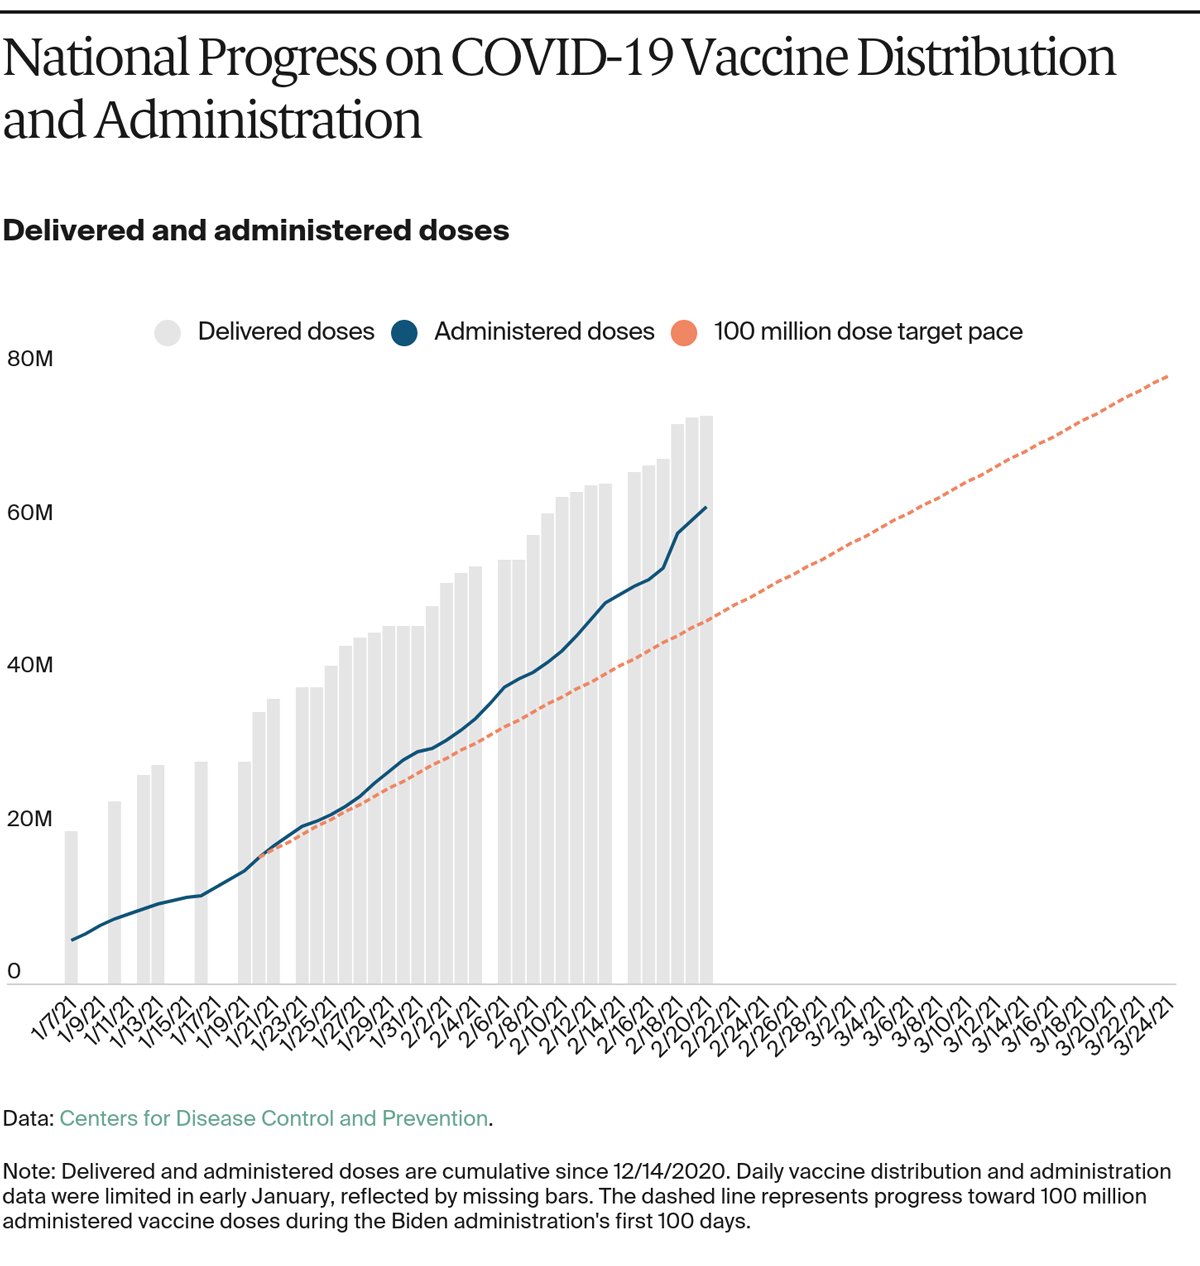 National Progress on COVID-19 Vaccine Distribution and Administration